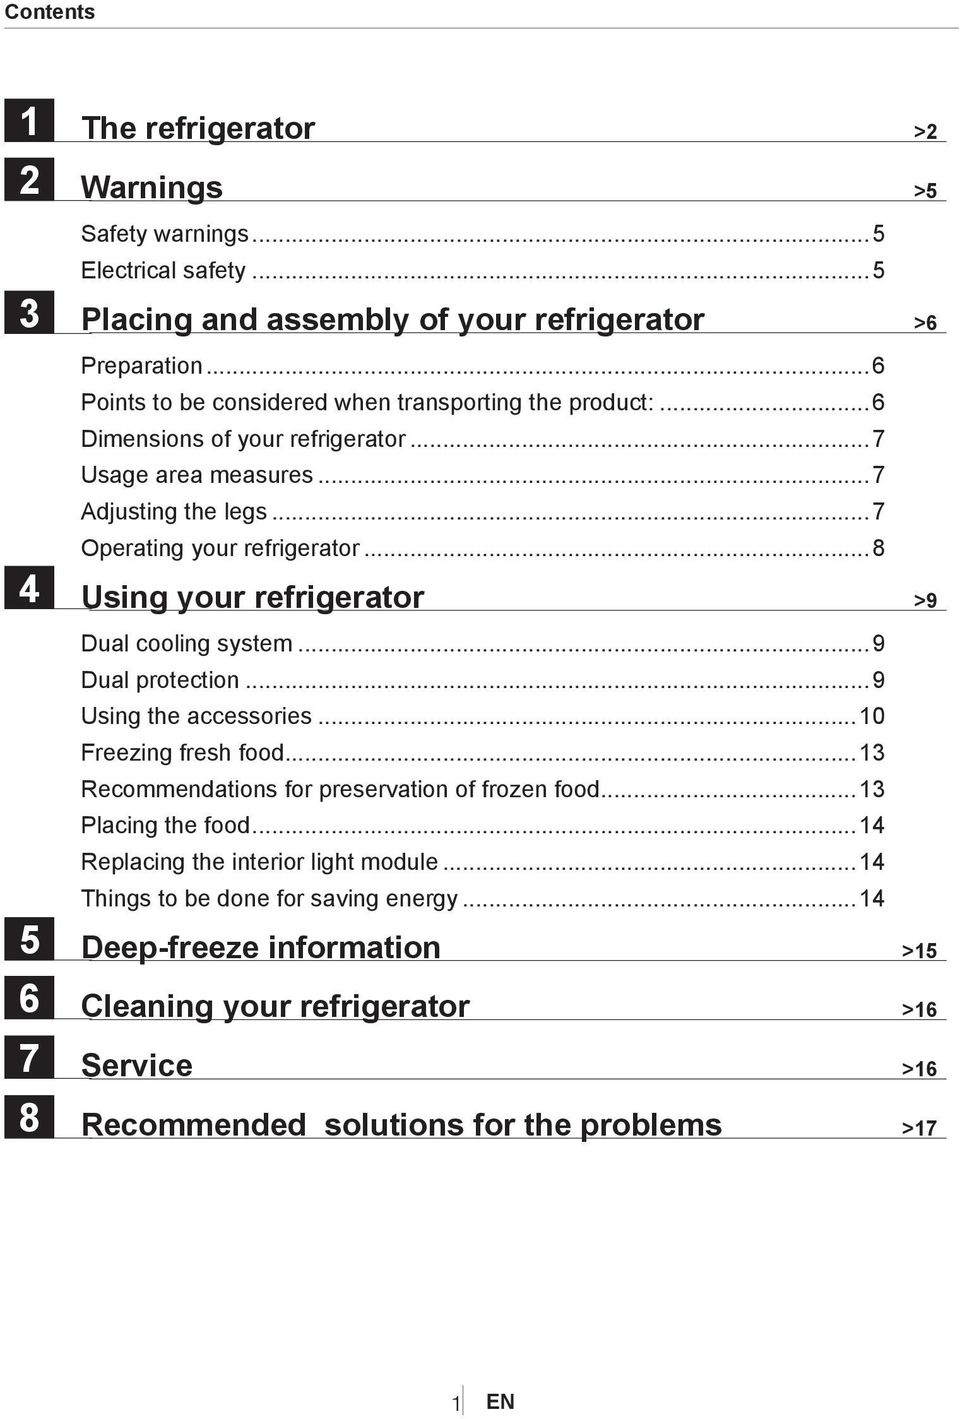 ..8 Using your refrigerator >9 Dual cooling system...9 Dual protection...9 Using the accessories...10 Freezing fresh food...13 Recommendations for preservation of frozen food.